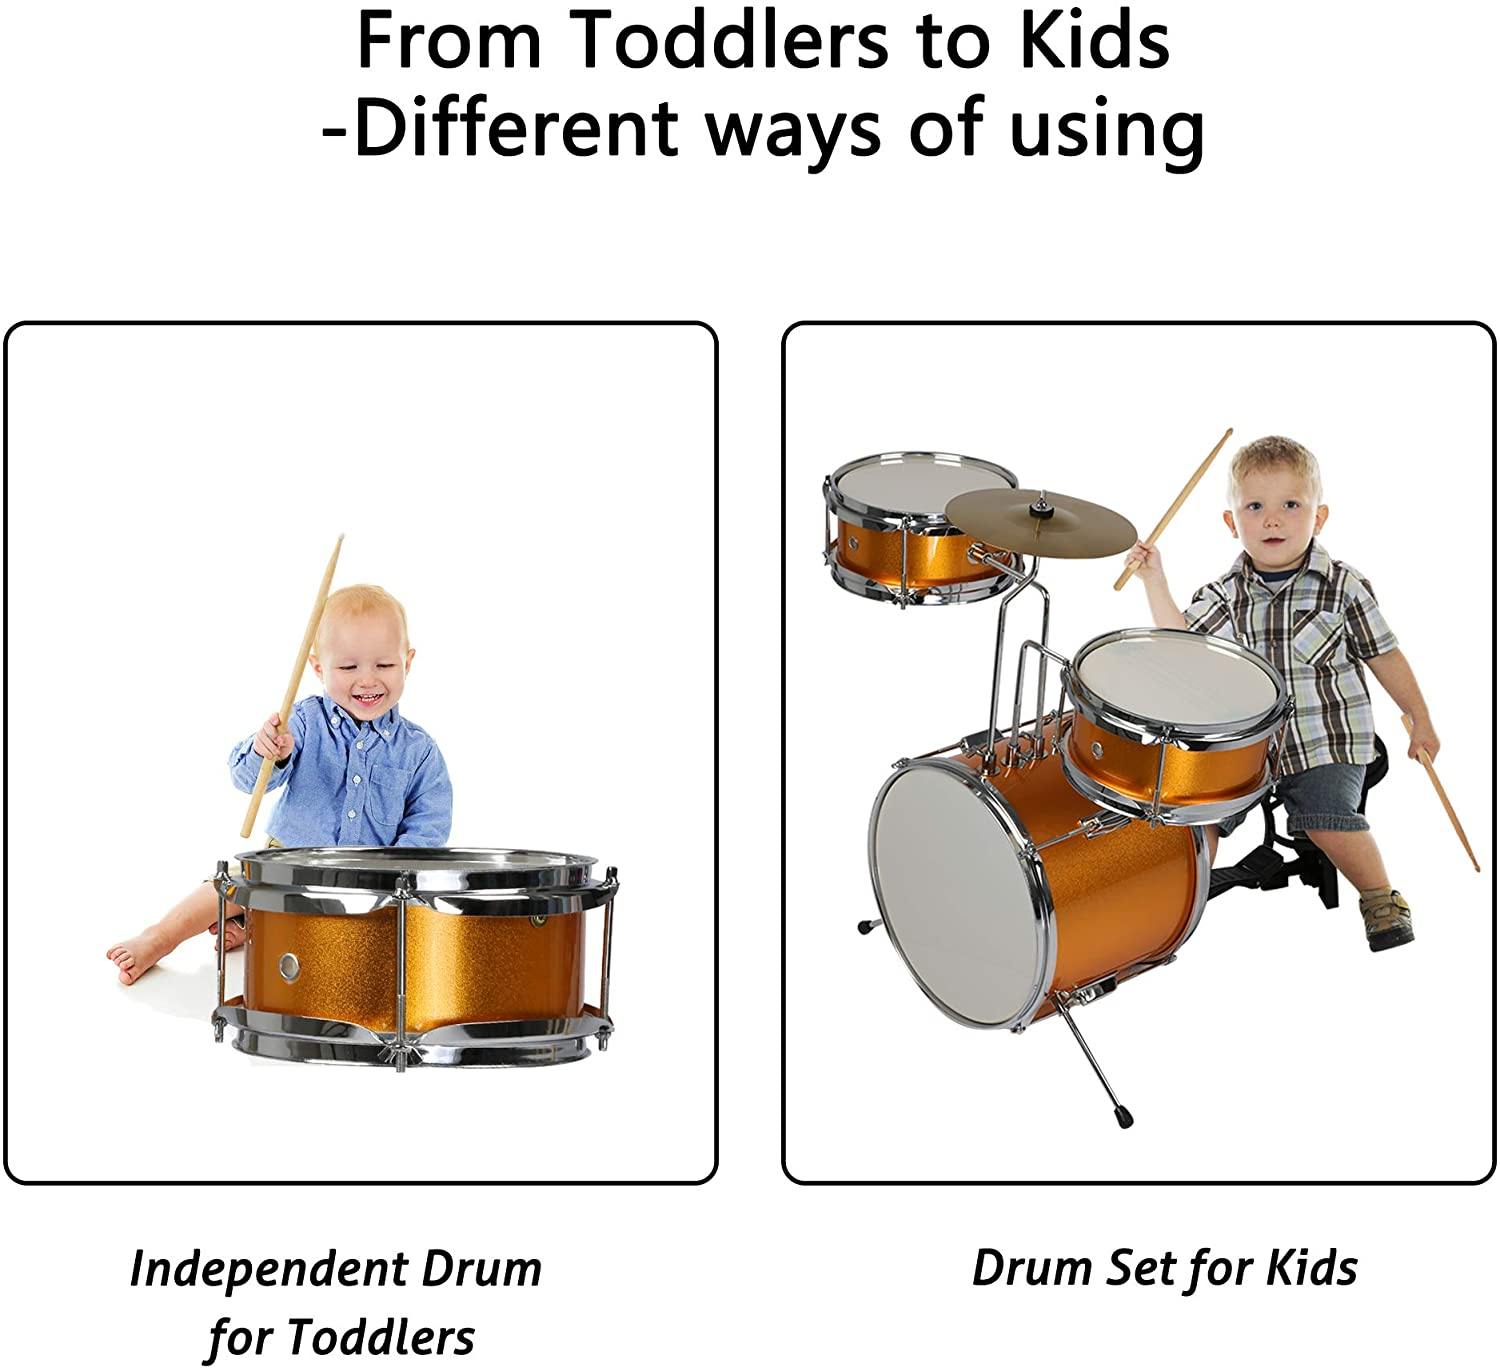 Kids Drum Set 3-Piece Junior Musical Instrument Beginner Kit with 13" Bass, Cymbals, Pedals, Drumsticks, Stool - Easy to Assemble - Bosonshop